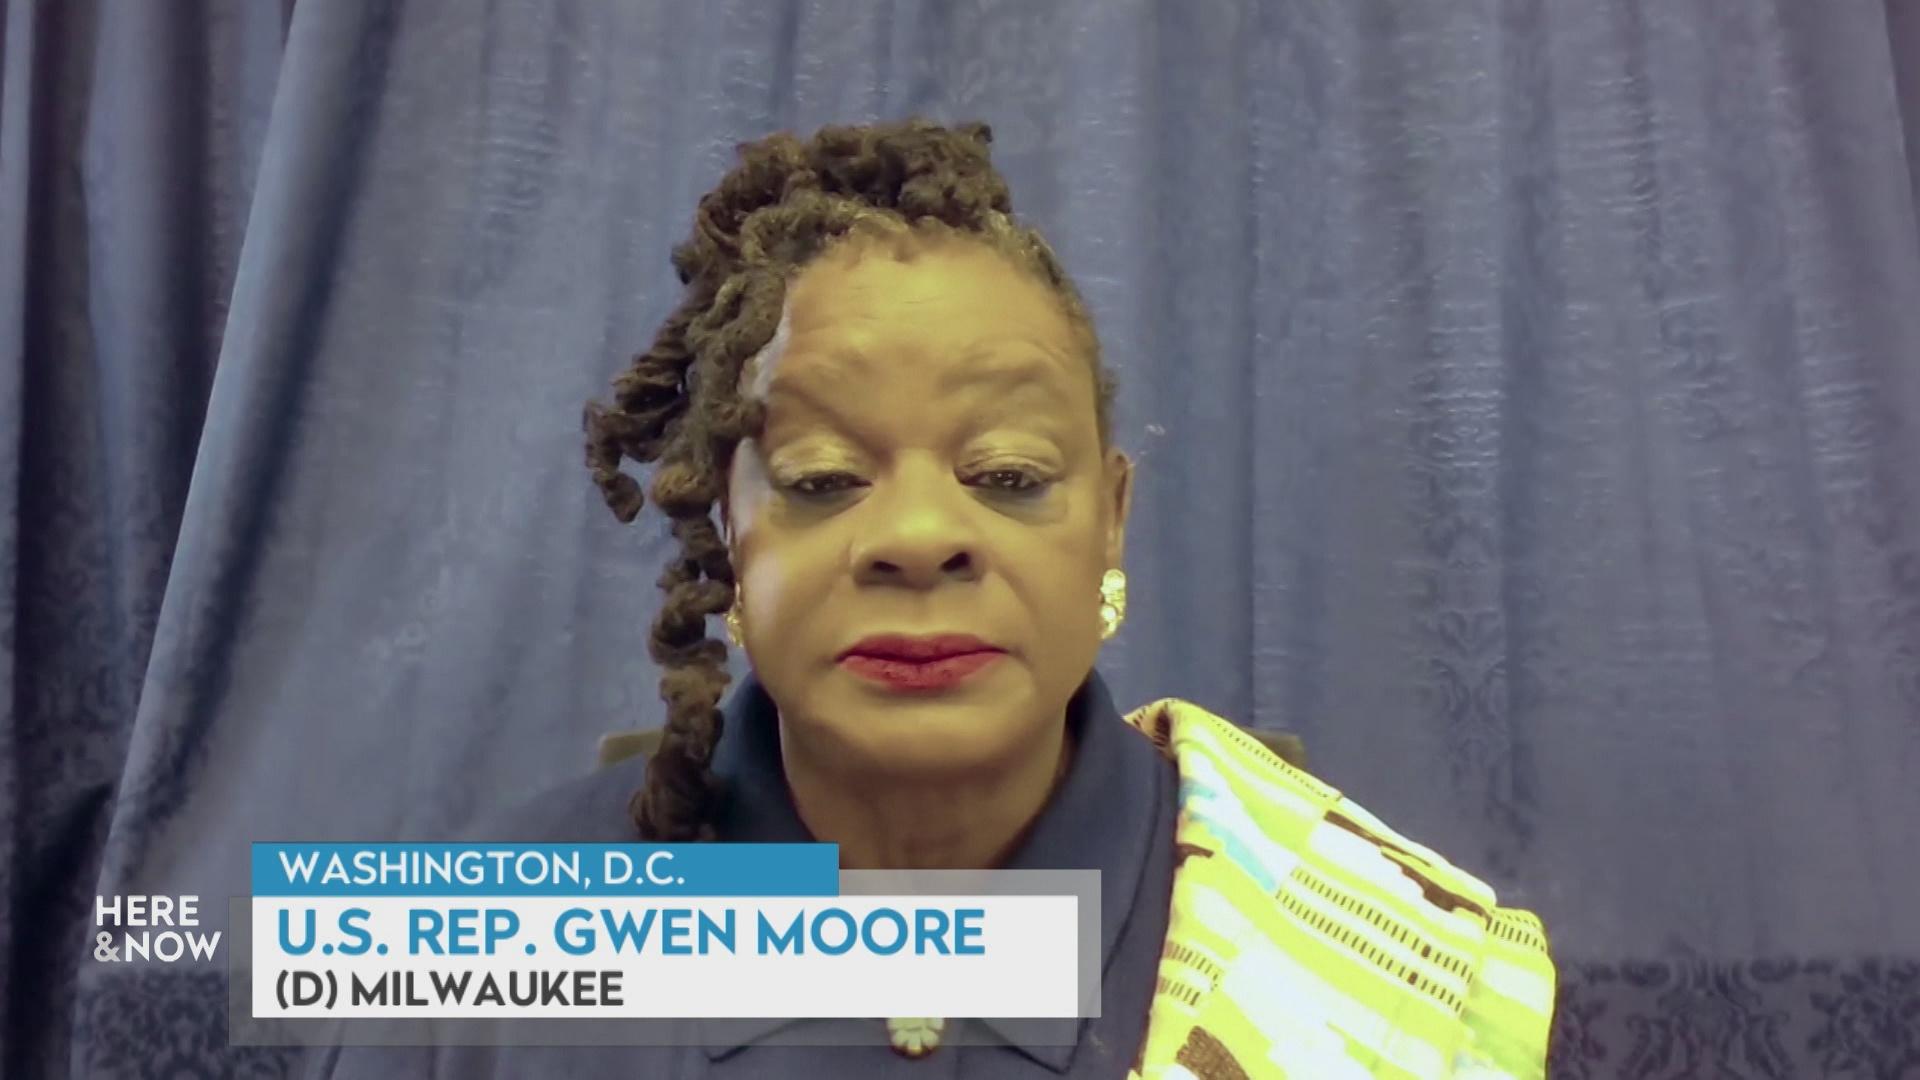 A still image from a video shows Gwen Moore seated in front of a blue curtain with a graphic at bottom reading 'Washington, D.C.,' 'U.S. Rep. Gwen Moore' and '(D) Milwaukee.'